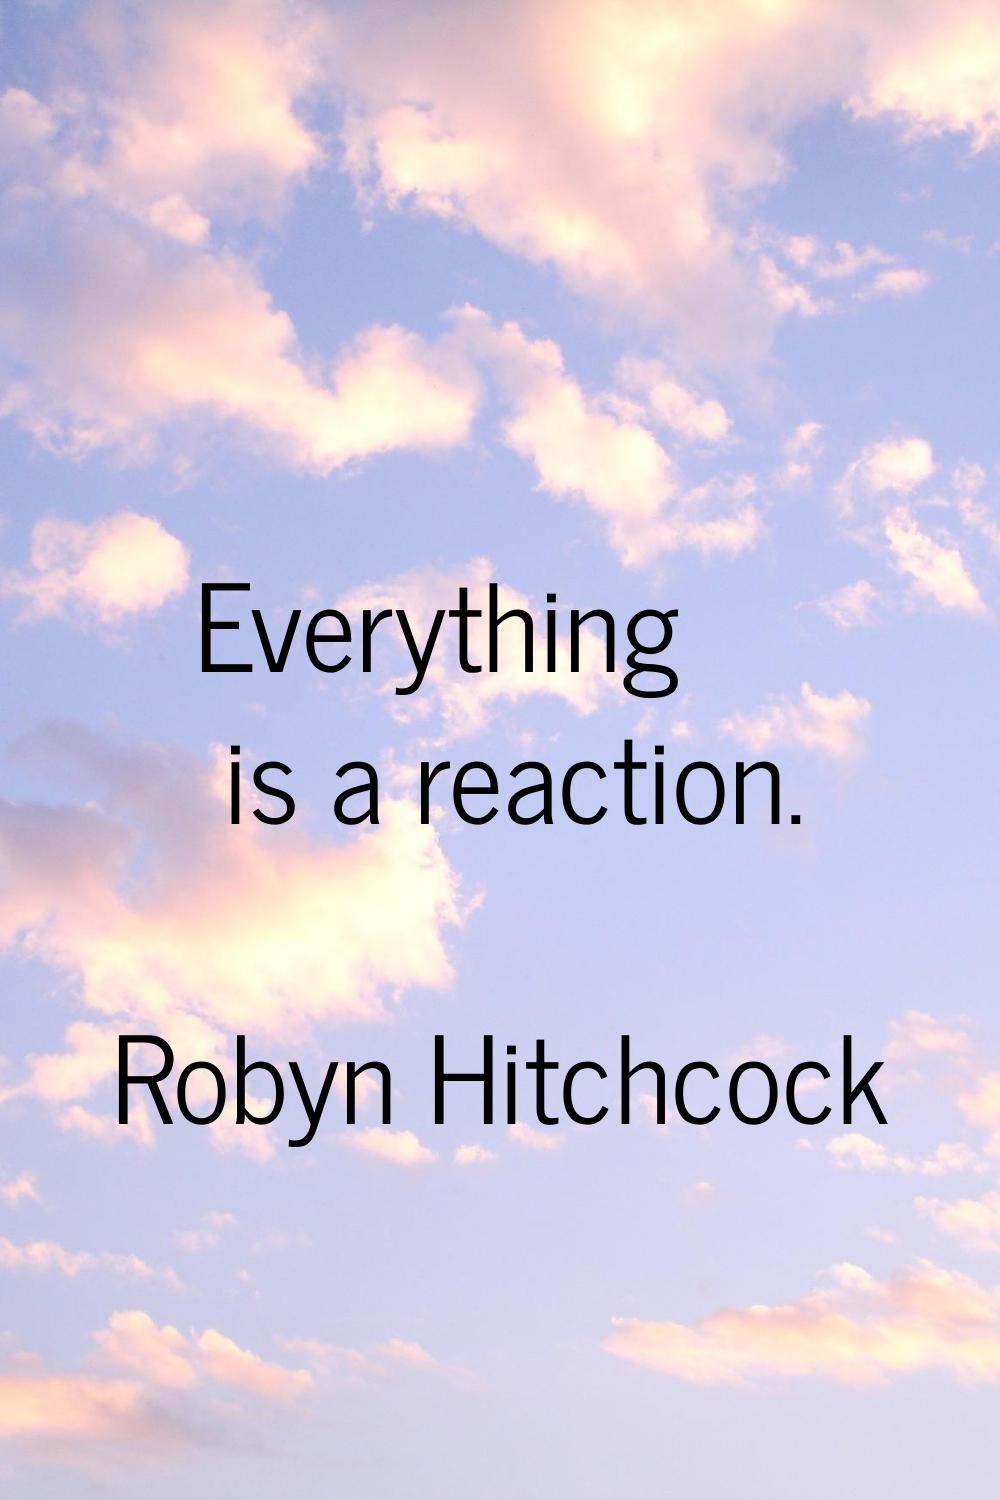 Everything is a reaction.